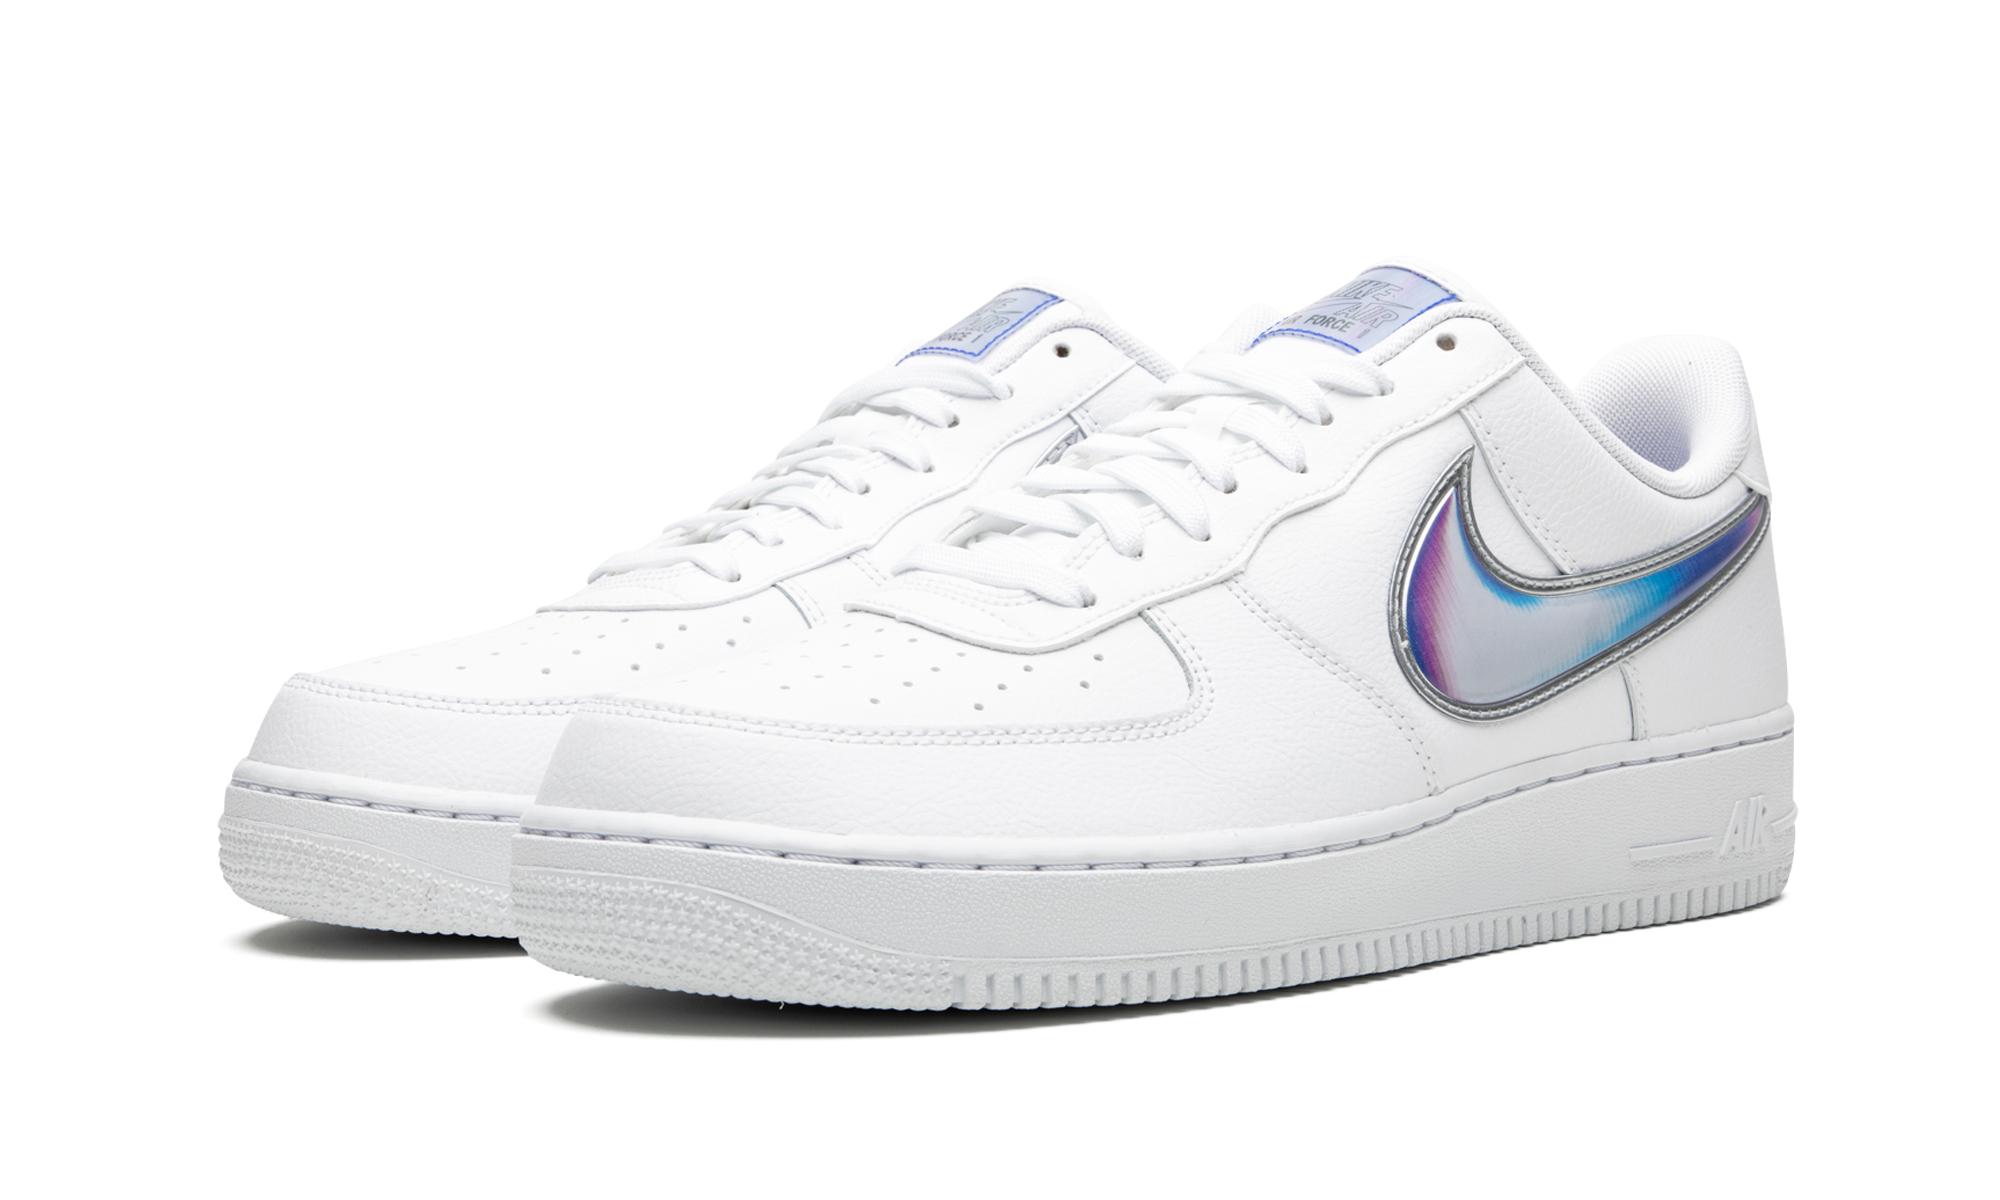 oversized swoosh air force 1